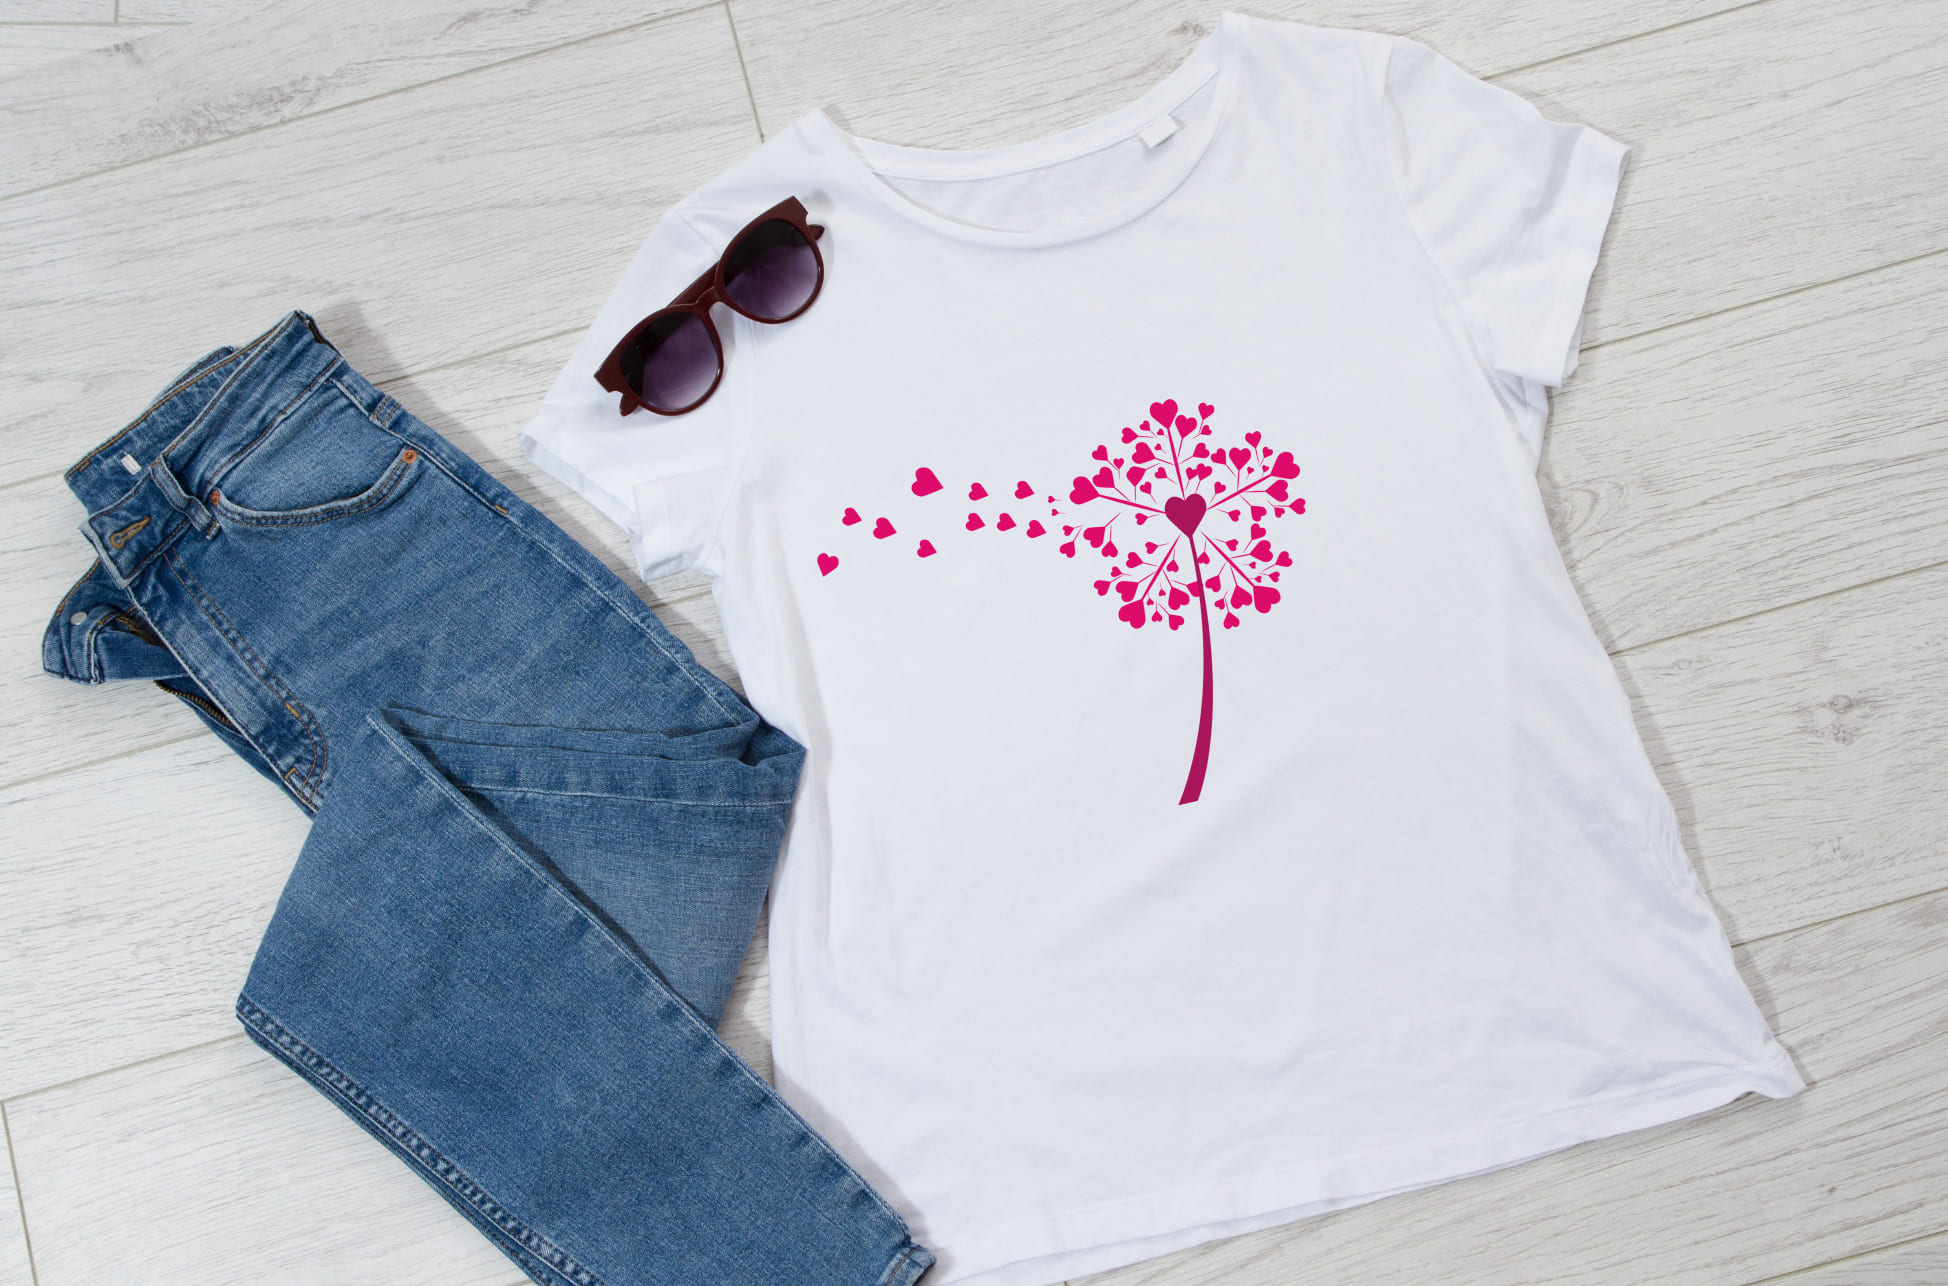 White T-shirt with pink dandelion flower and sunglasses with jeans.